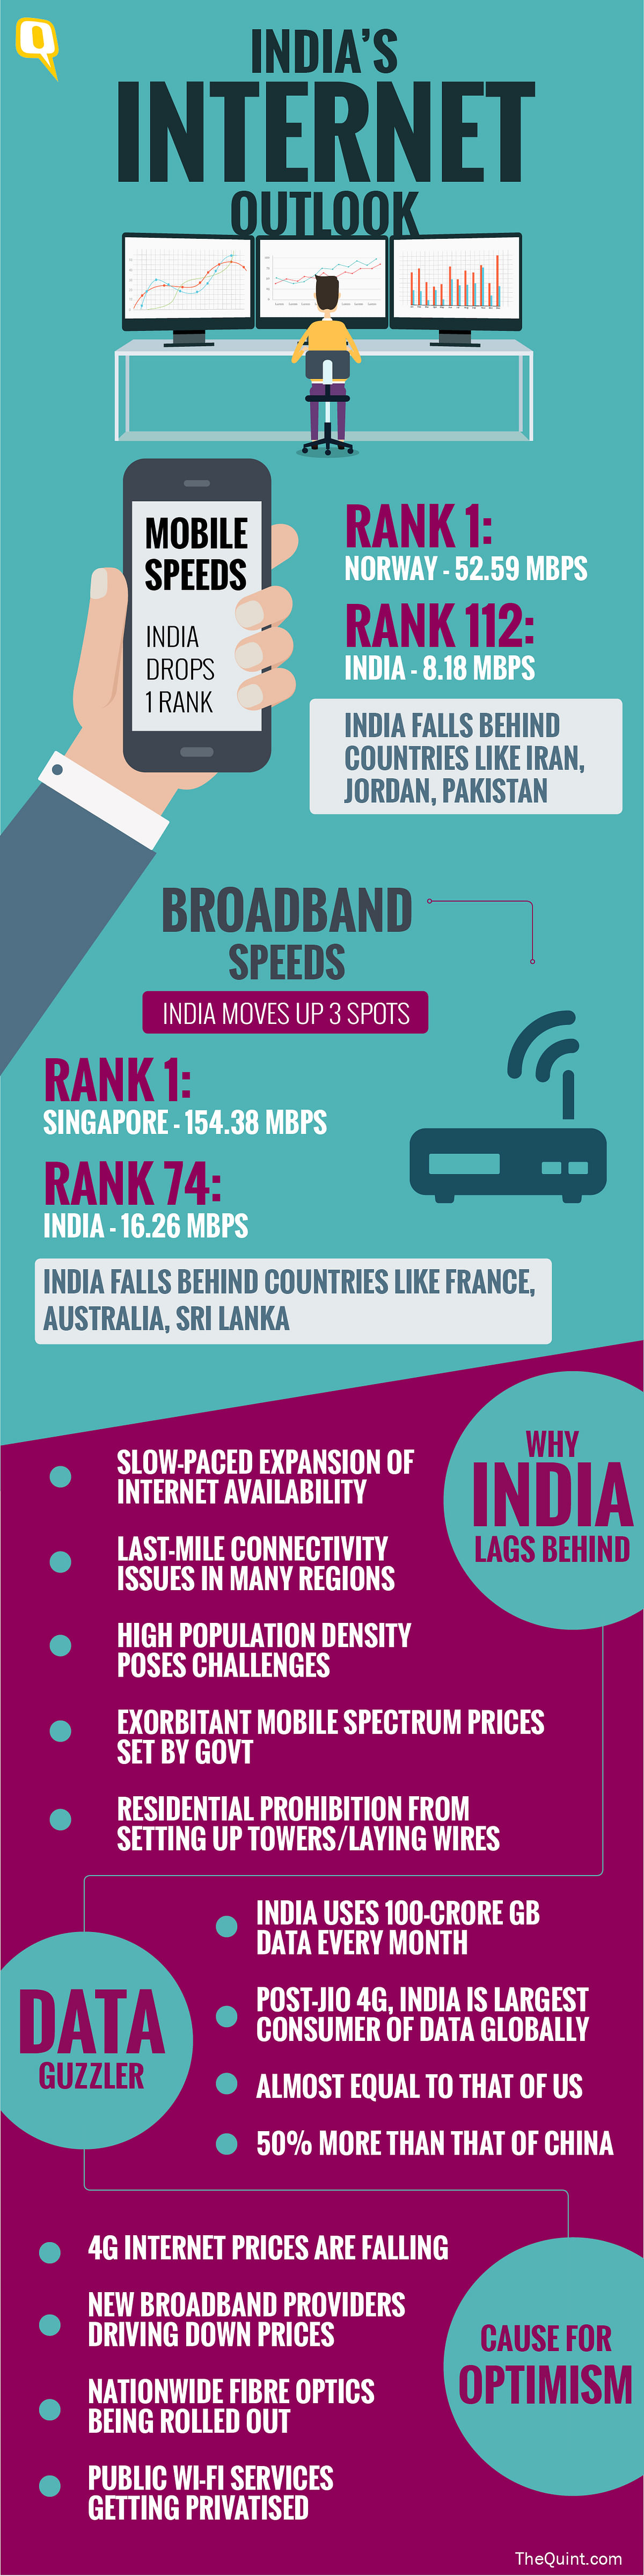 Internet plans might have become cheaper in India, but our speeds are no match for those of our global peers’.